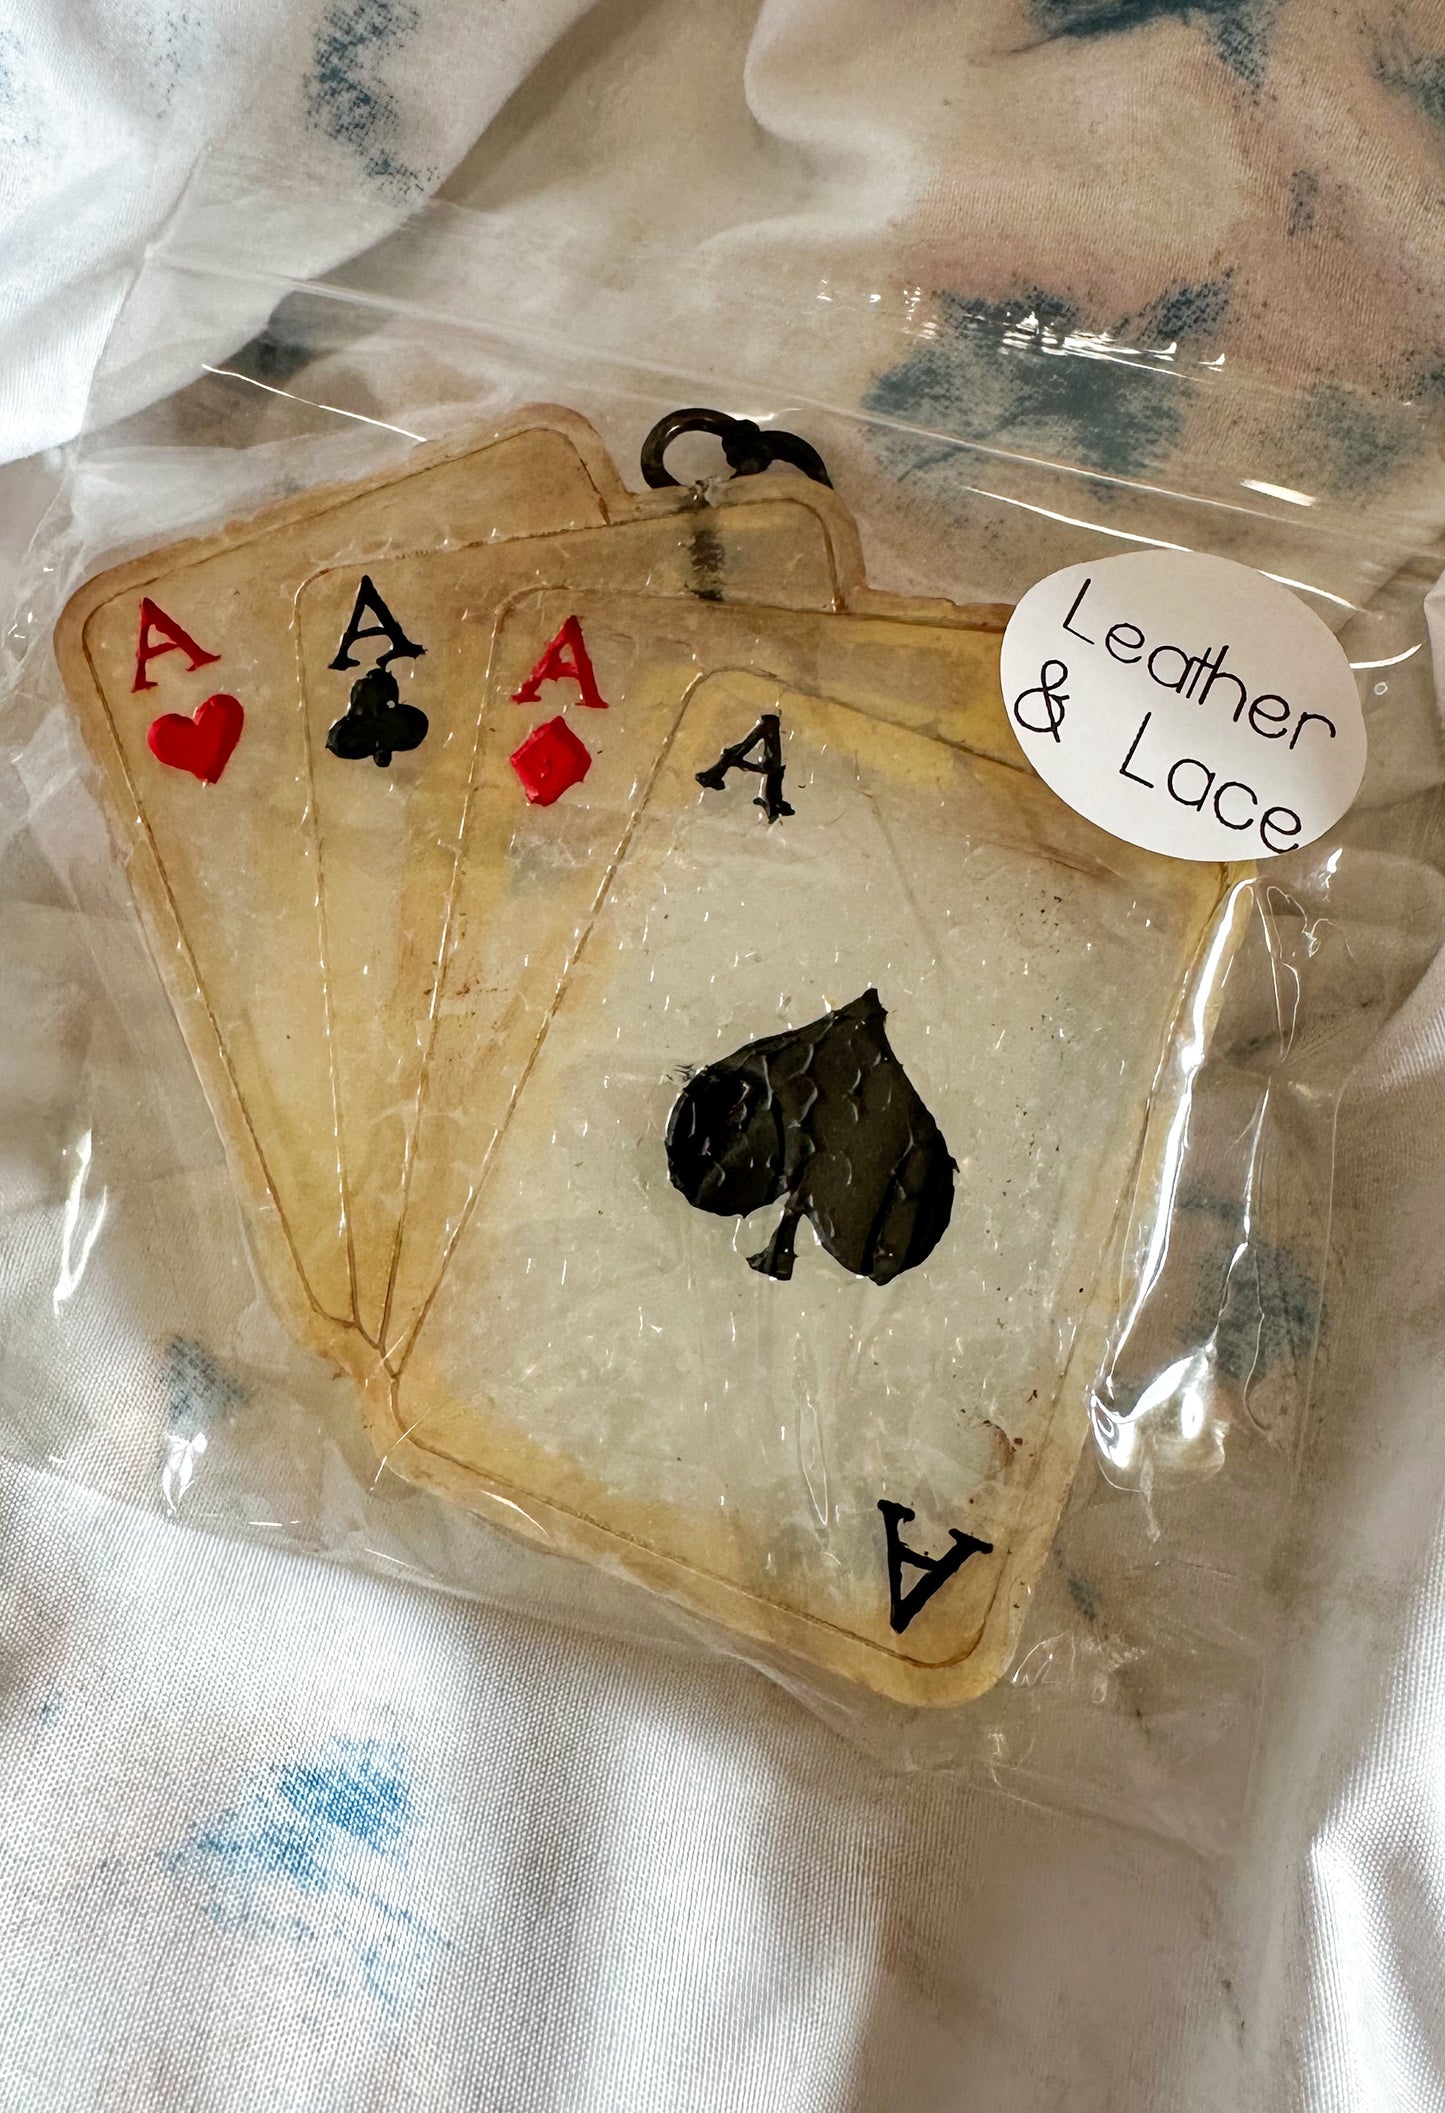 4 of a Kind Playing Cards Air Freshener